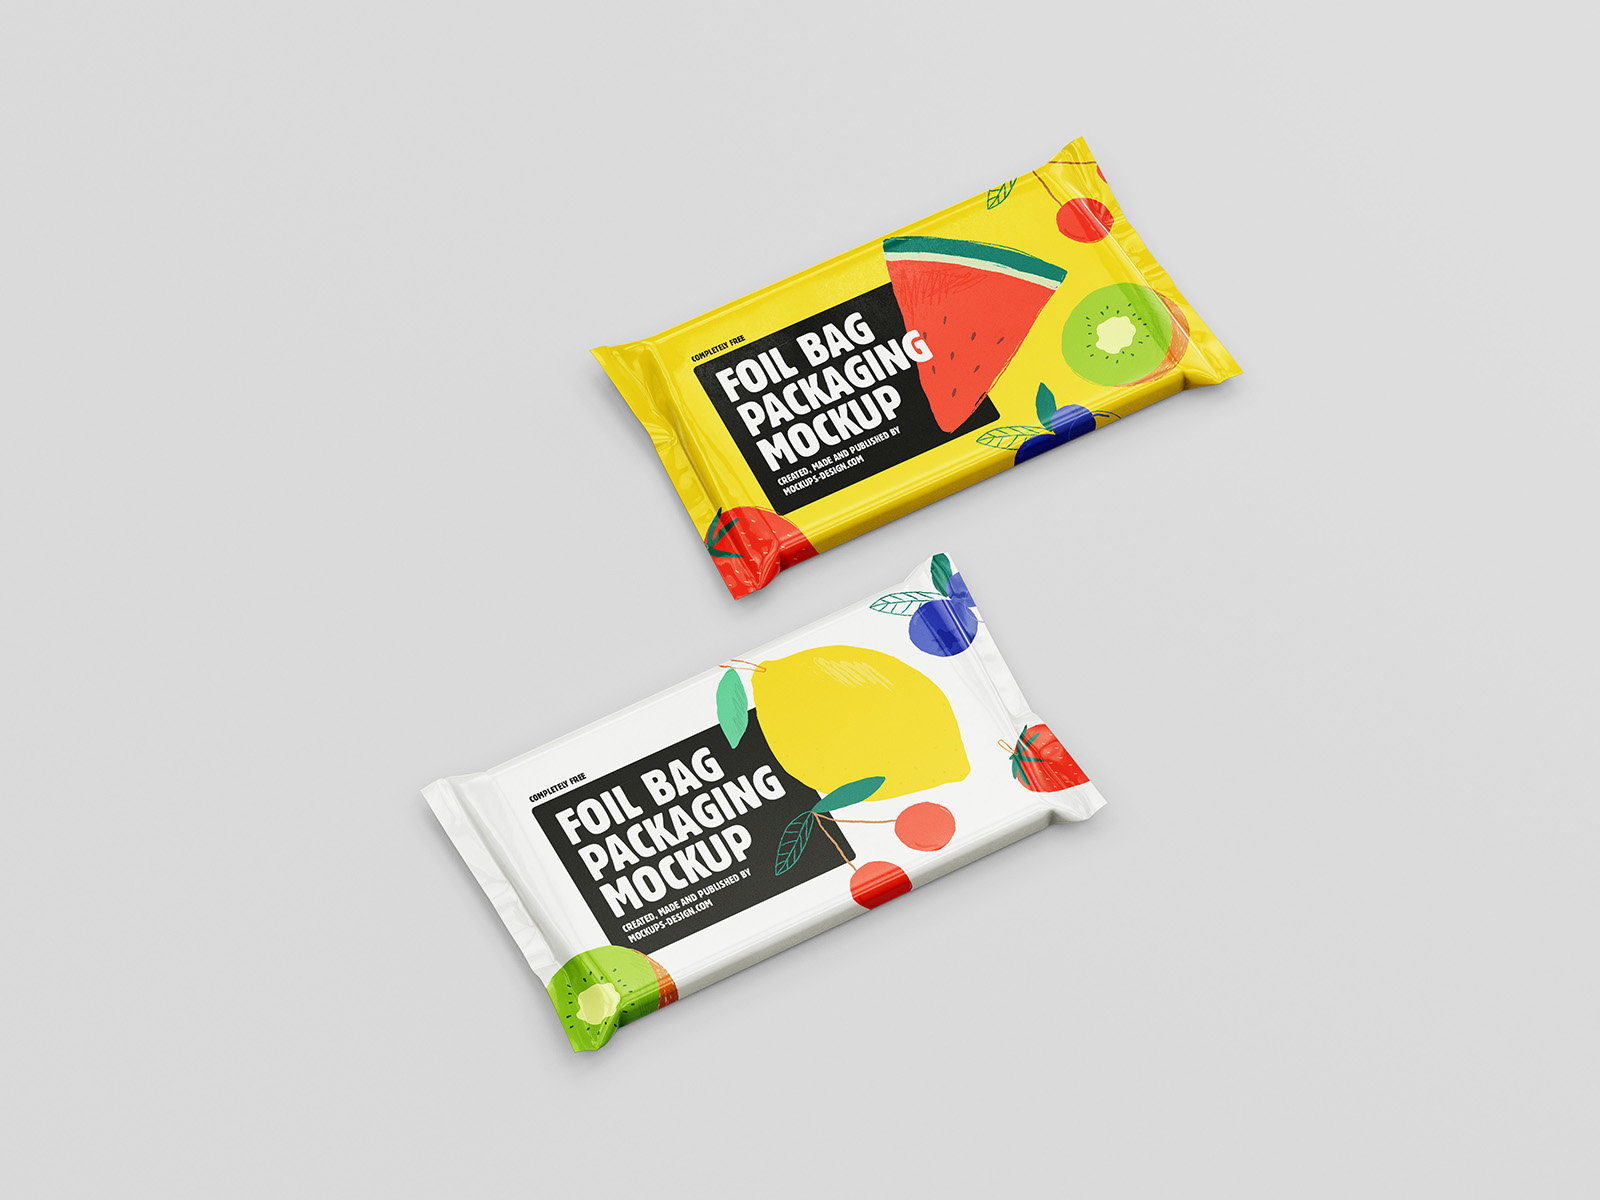 5 Shots of Food Pouches Mockup FREE PSD